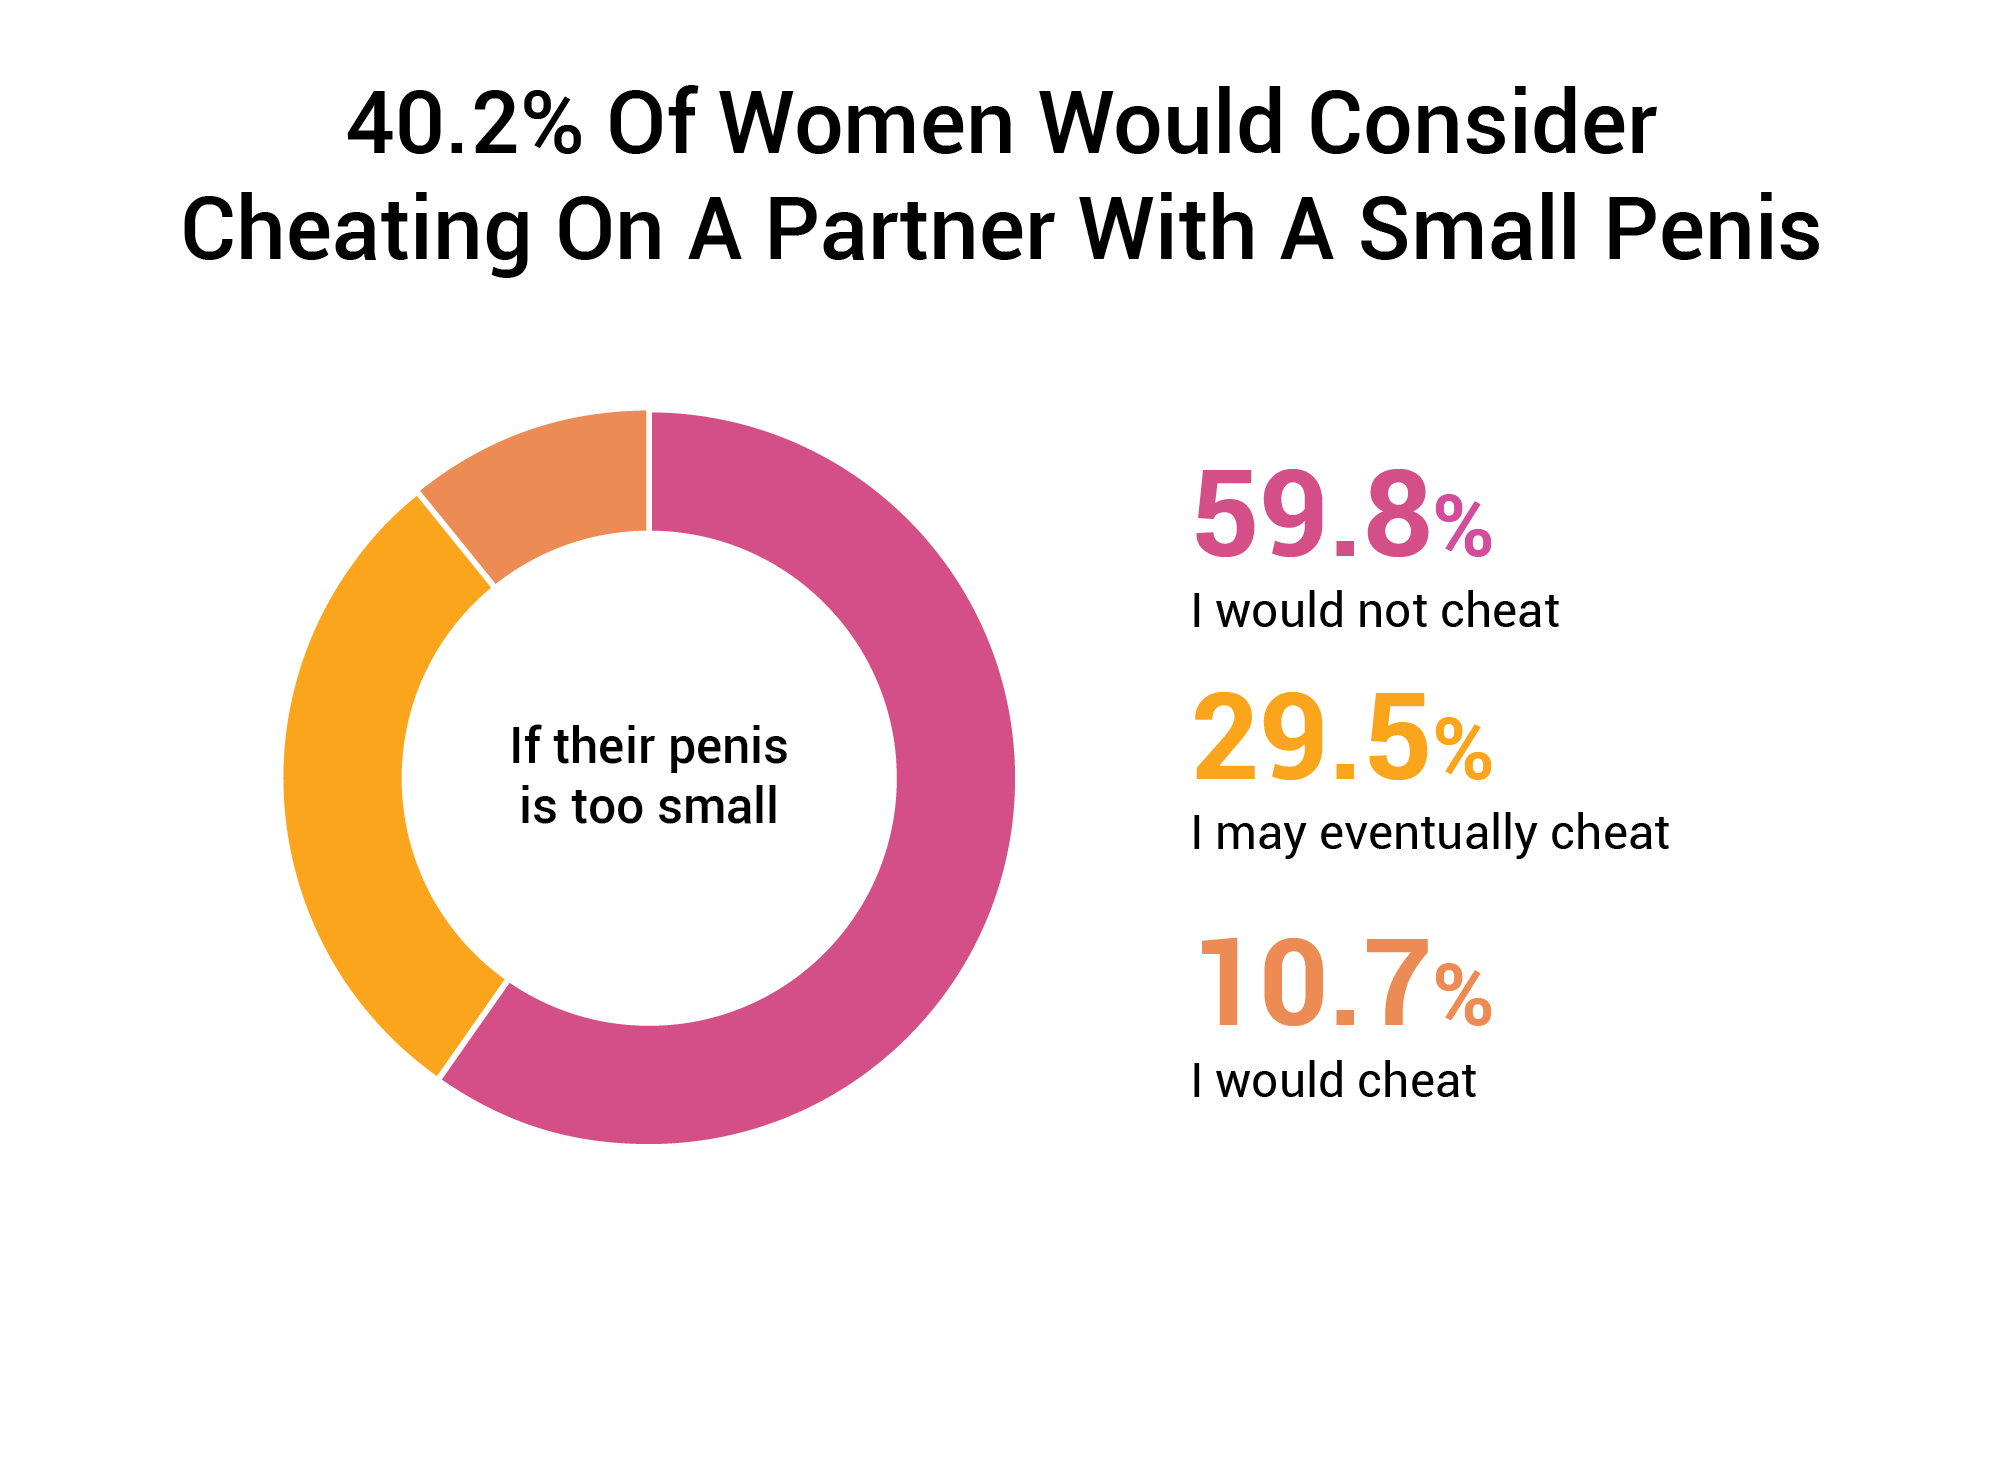 wives discuss penis size